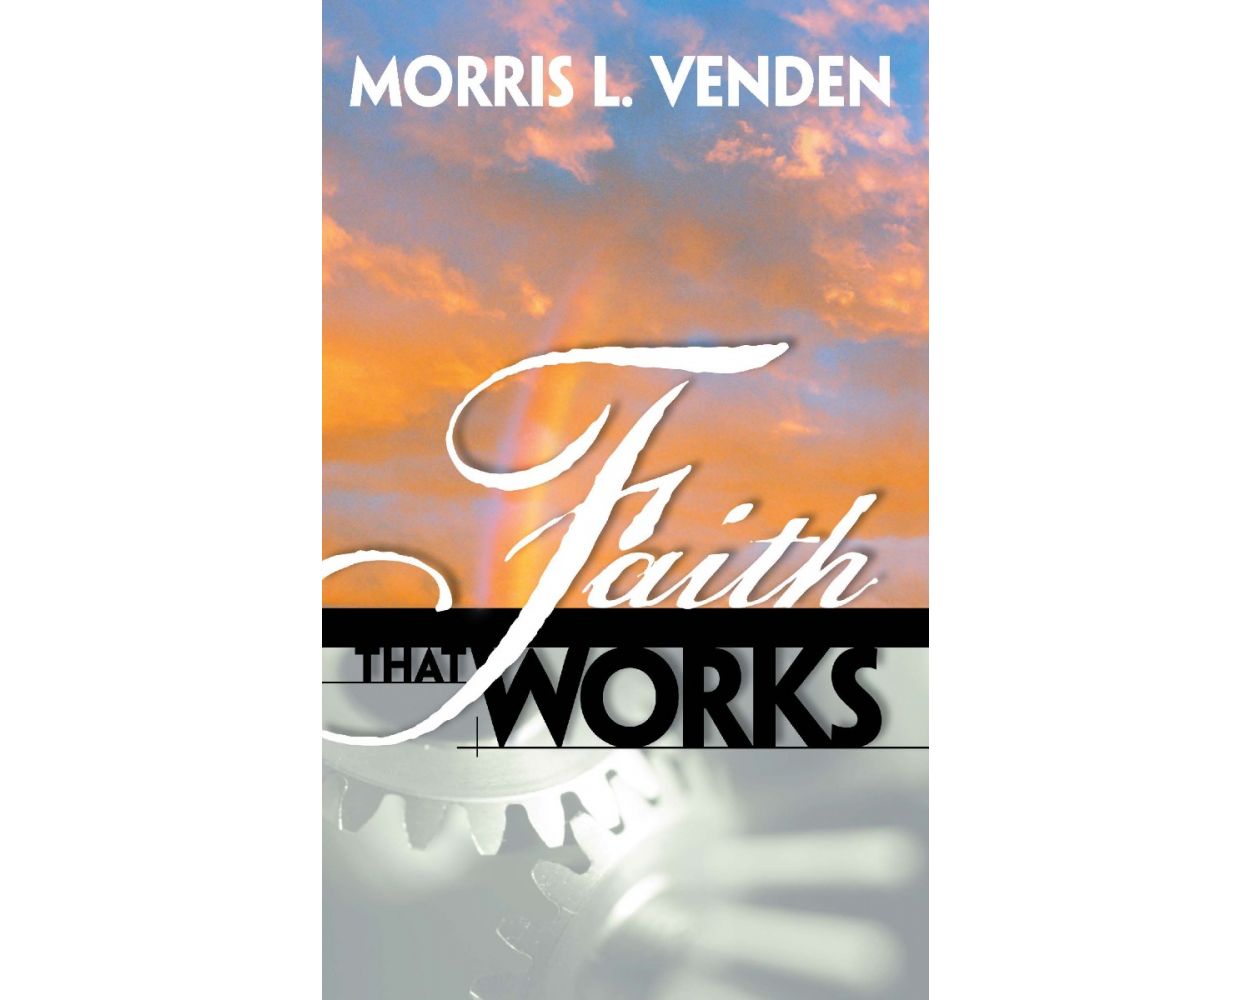 11+ How to know gods will in your life morris venden pdf the difference